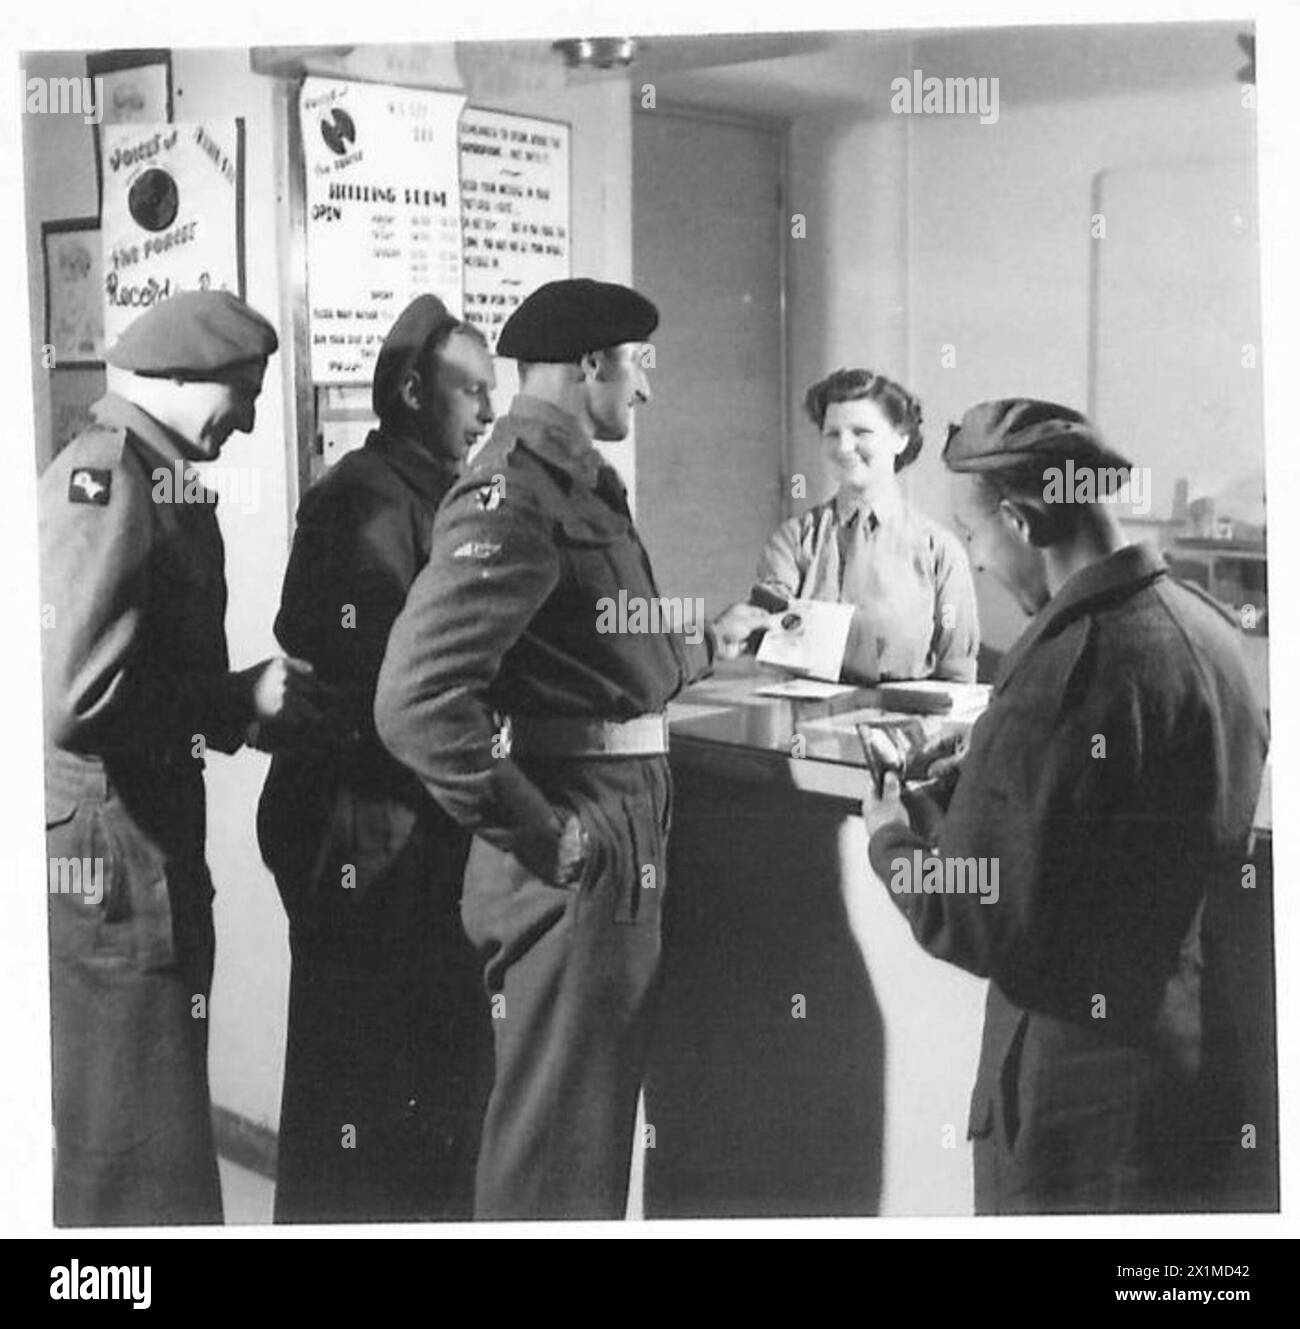 ITALY : 'VOICES OF THE FORCES' - Ted Jellyman buys the first record in the 'Voices of the Forces' scheme, from the NAAFI shop in the Alexander Club in Rome, British Army Stock Photo